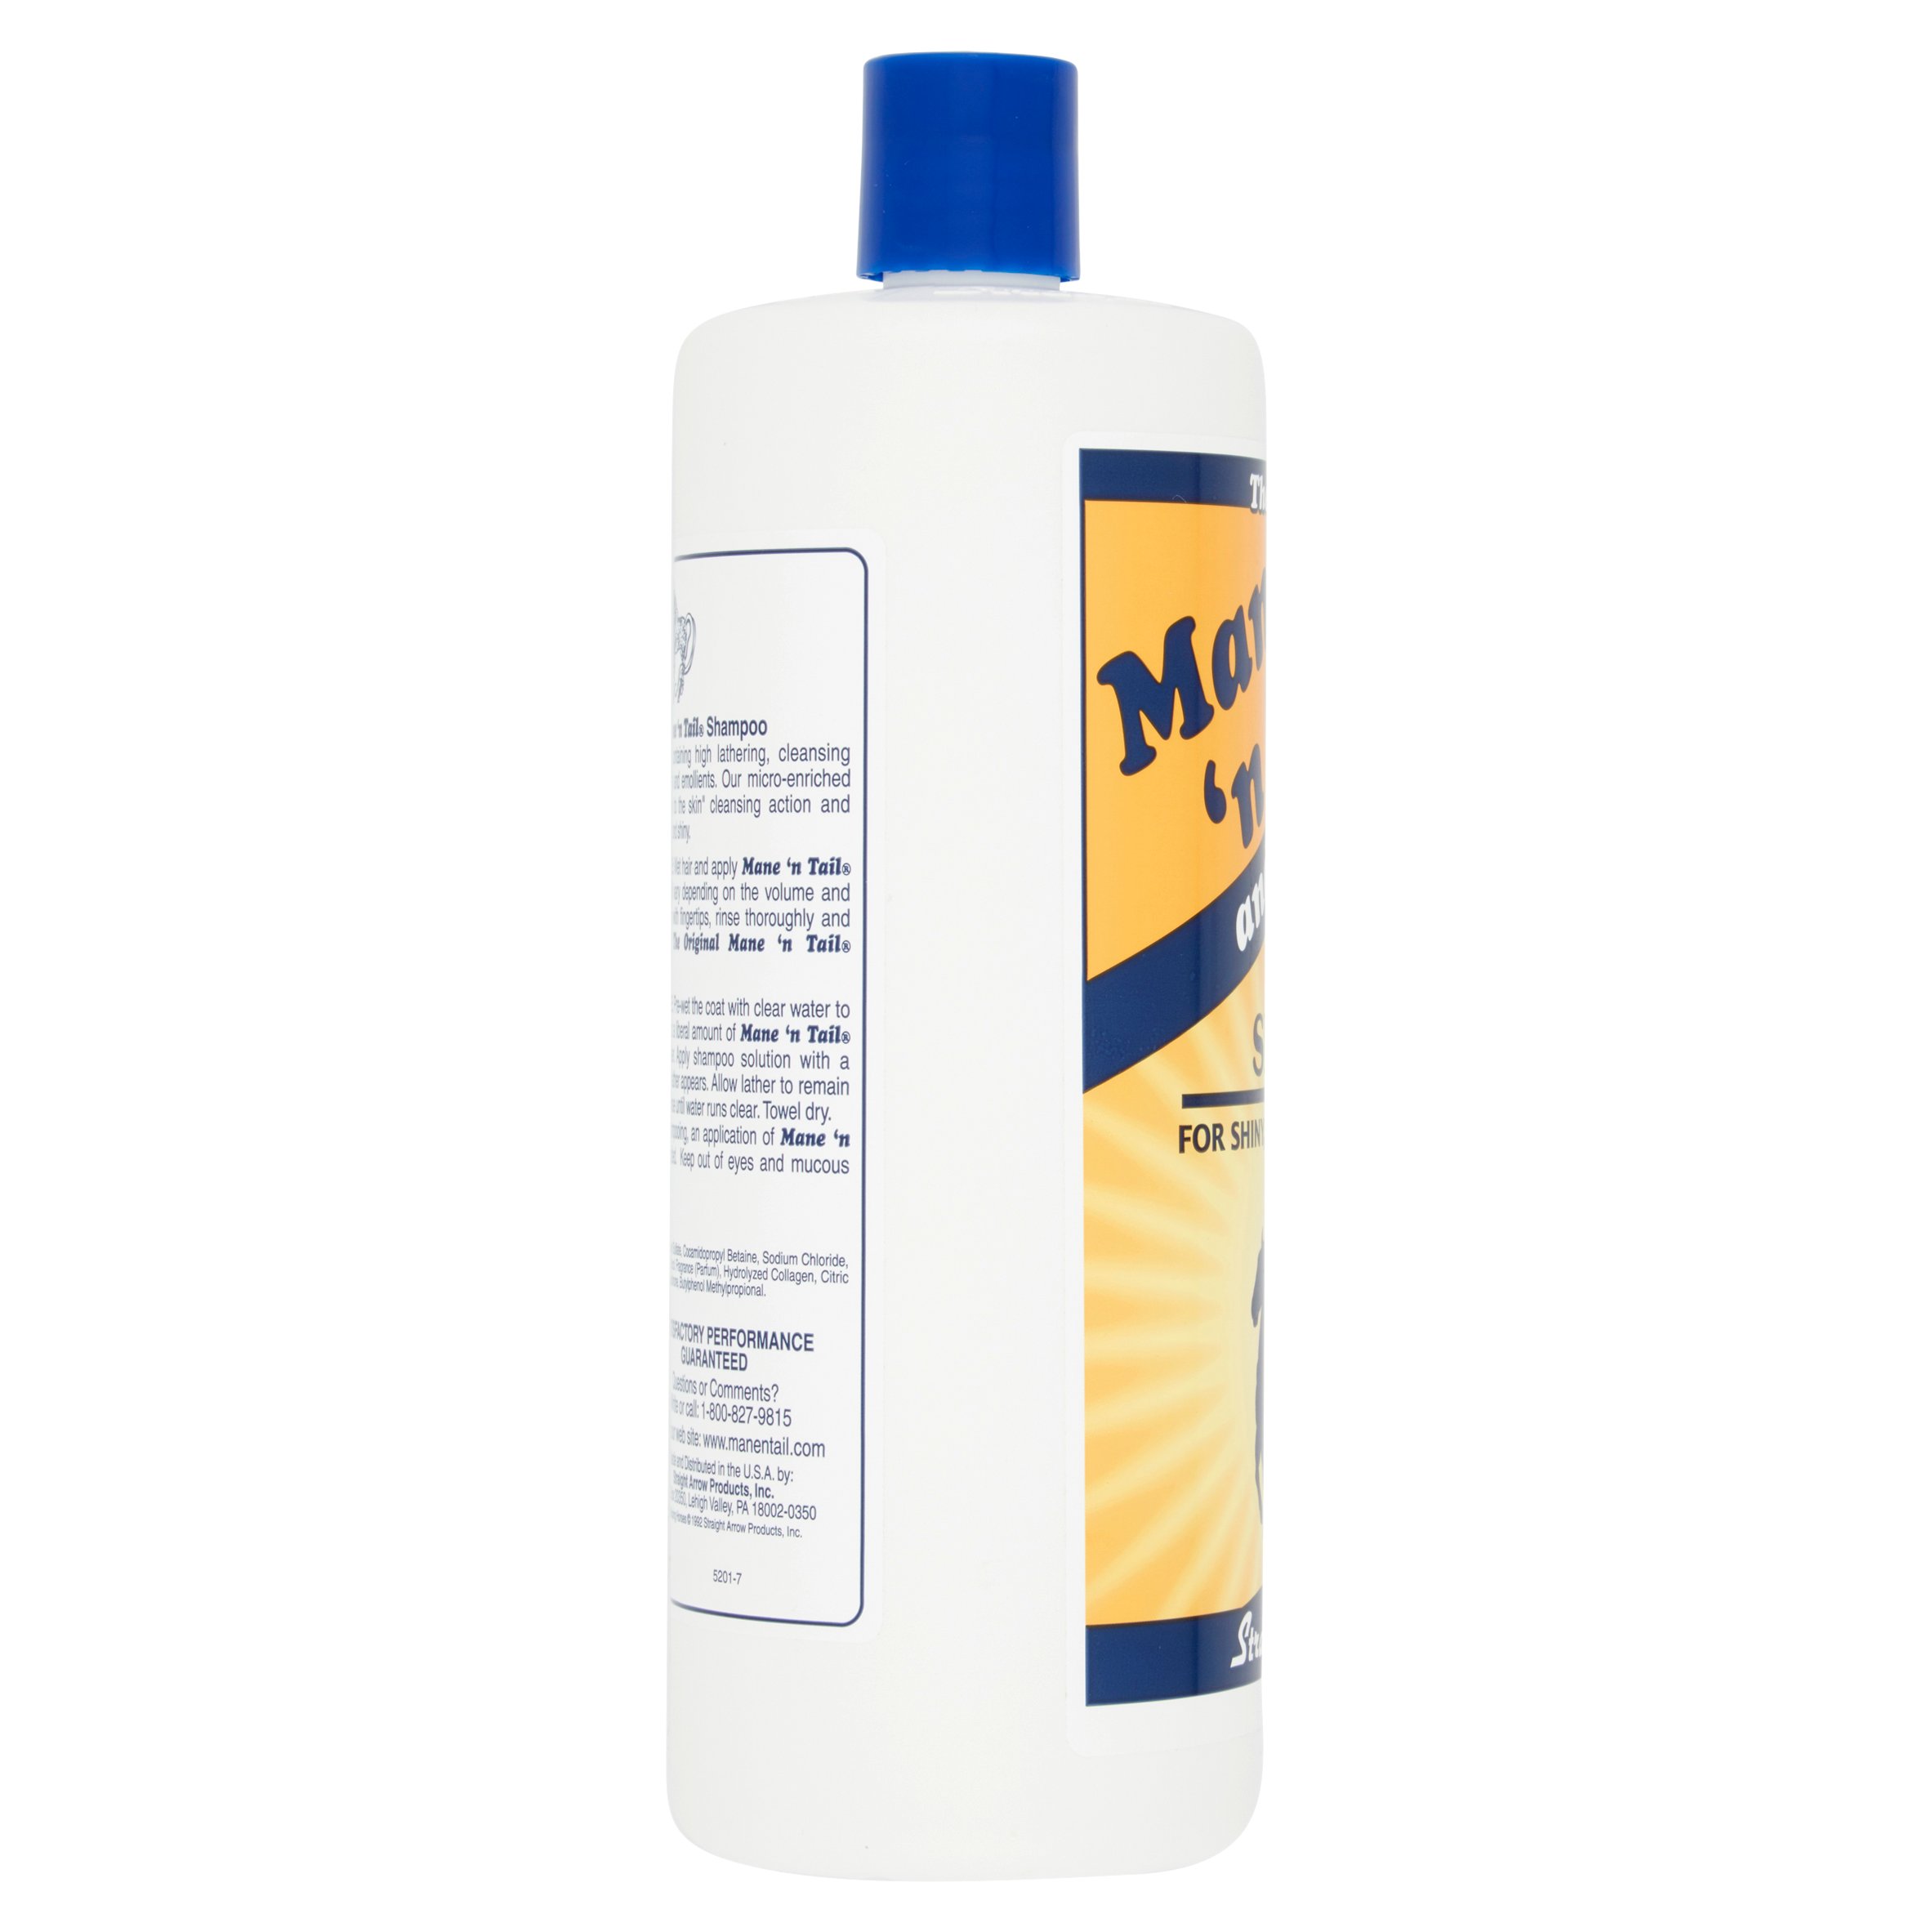 Mane 'n Tail: Original Formula Shampoo (2 Pack) For Thicker Fuller Hair (32 Oz Each), Horses and Dogs - image 2 of 5